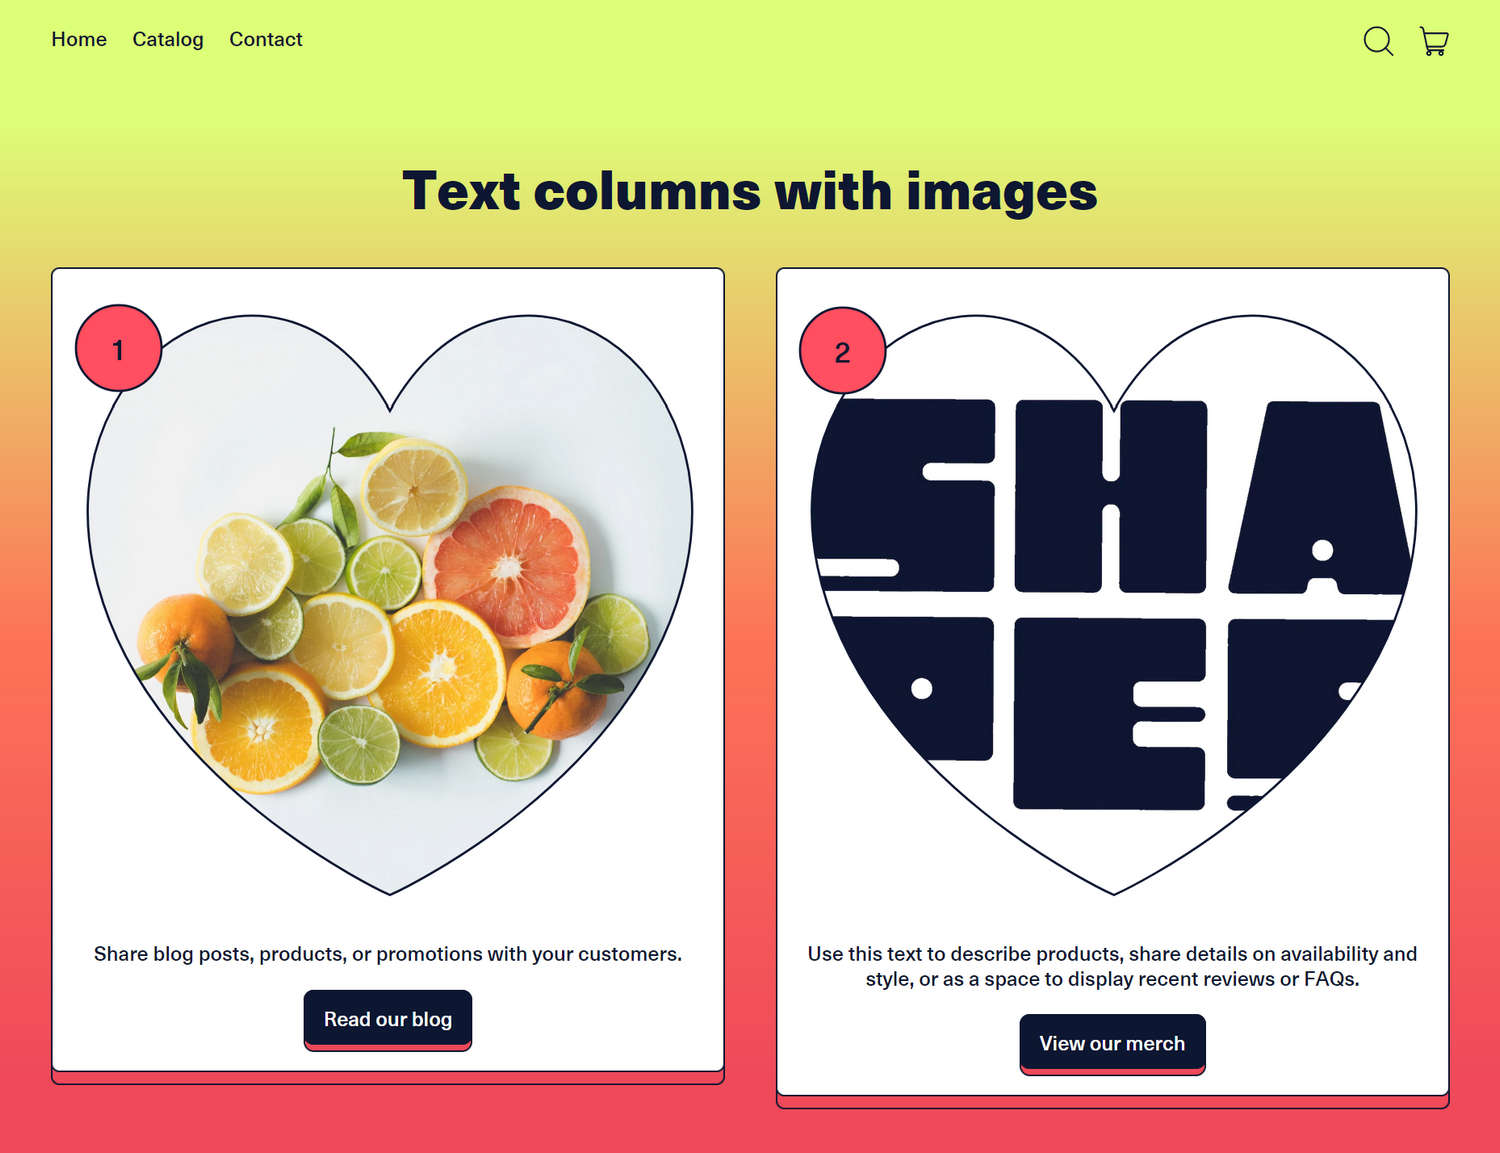 An example Text columns with images section on a store's homepage.